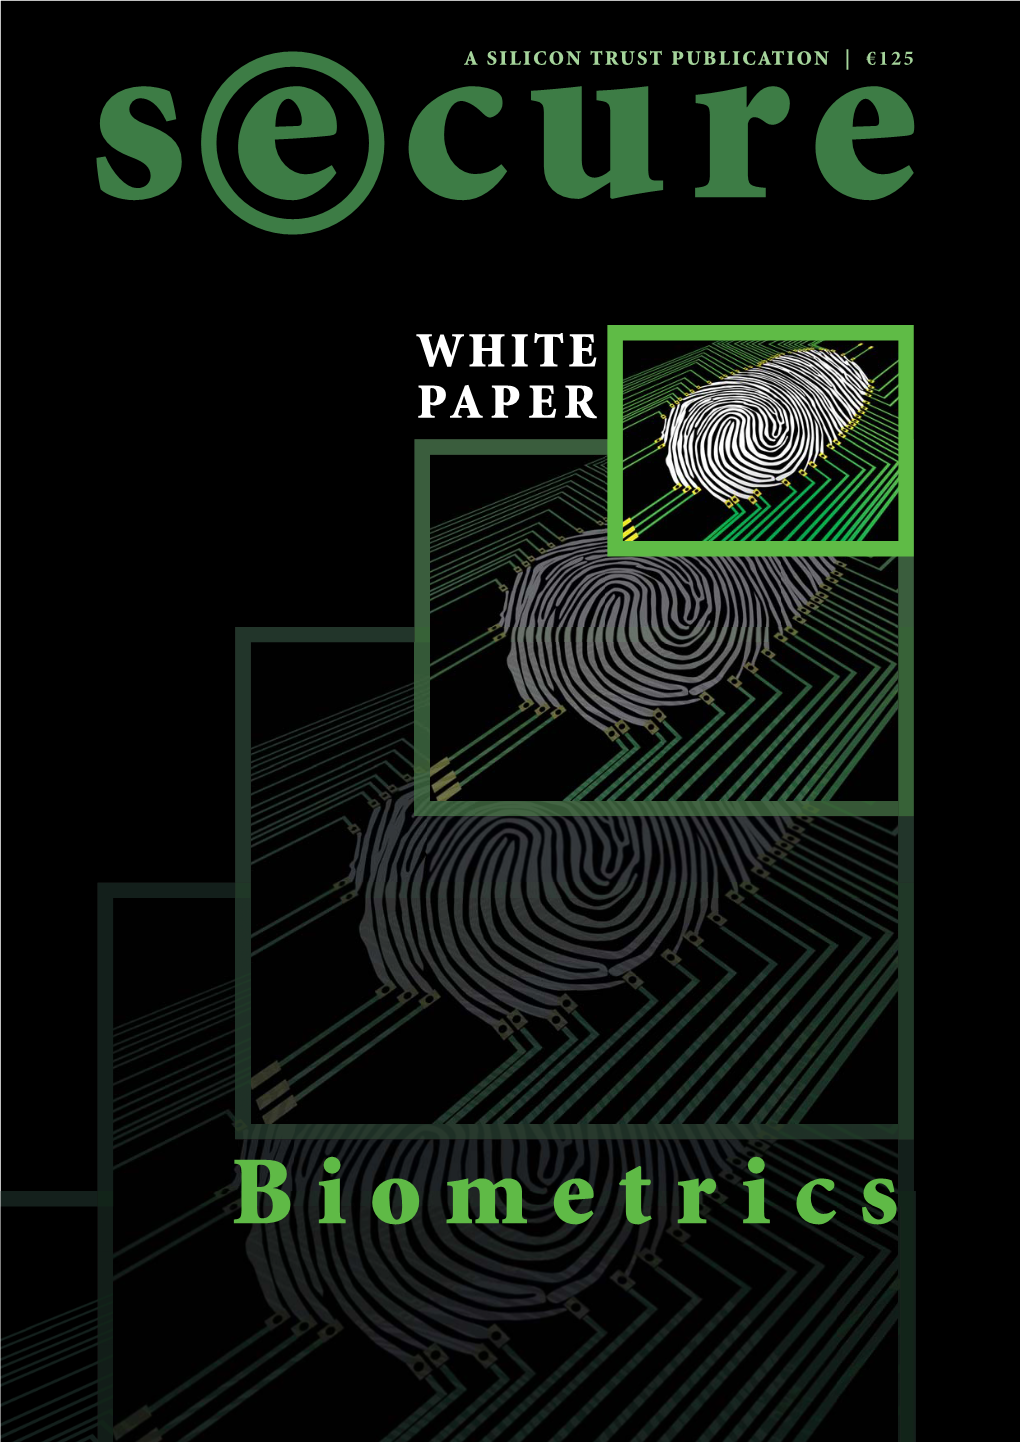 Biometrics Edition1 /2008 the SECURE Whitepaper Is a Silicon Trust Program Publication, Sponsored by Infineon Technologies AG